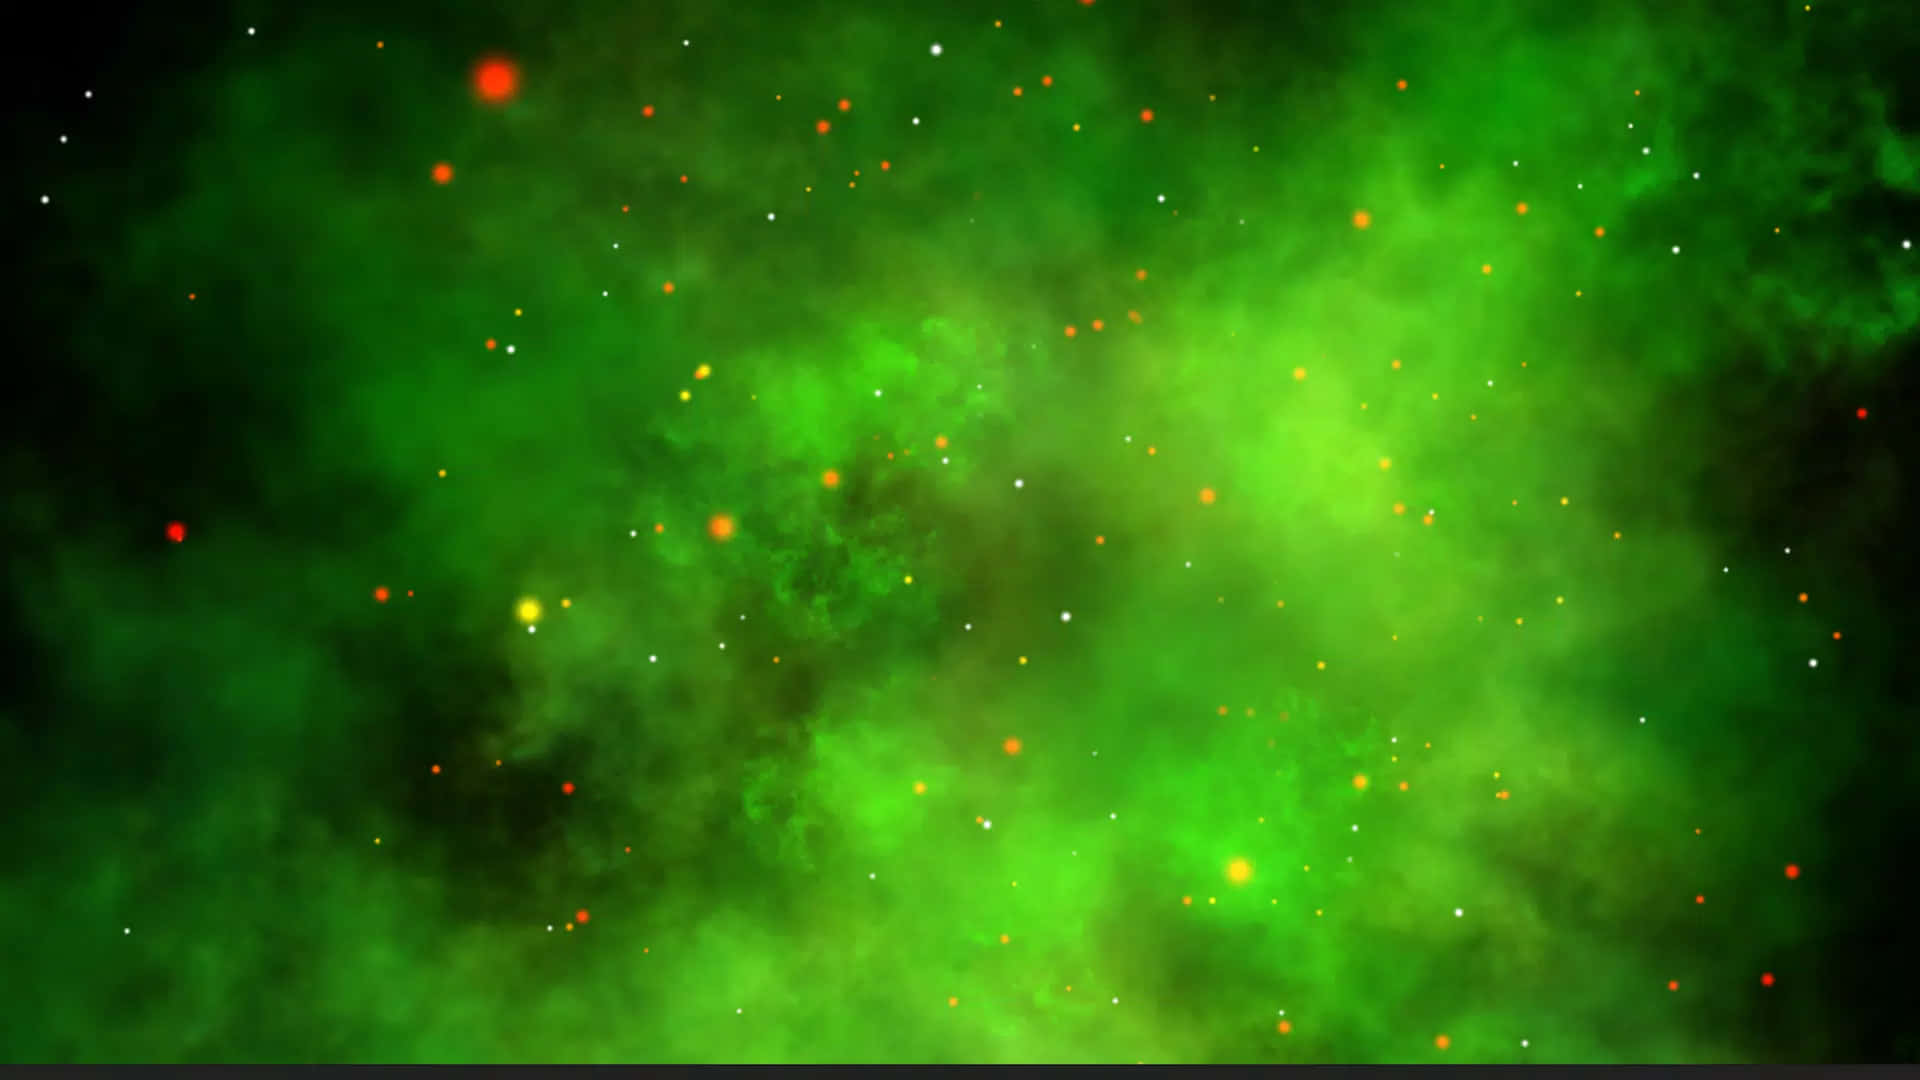 Explore the universe with Green Galaxy Wallpaper